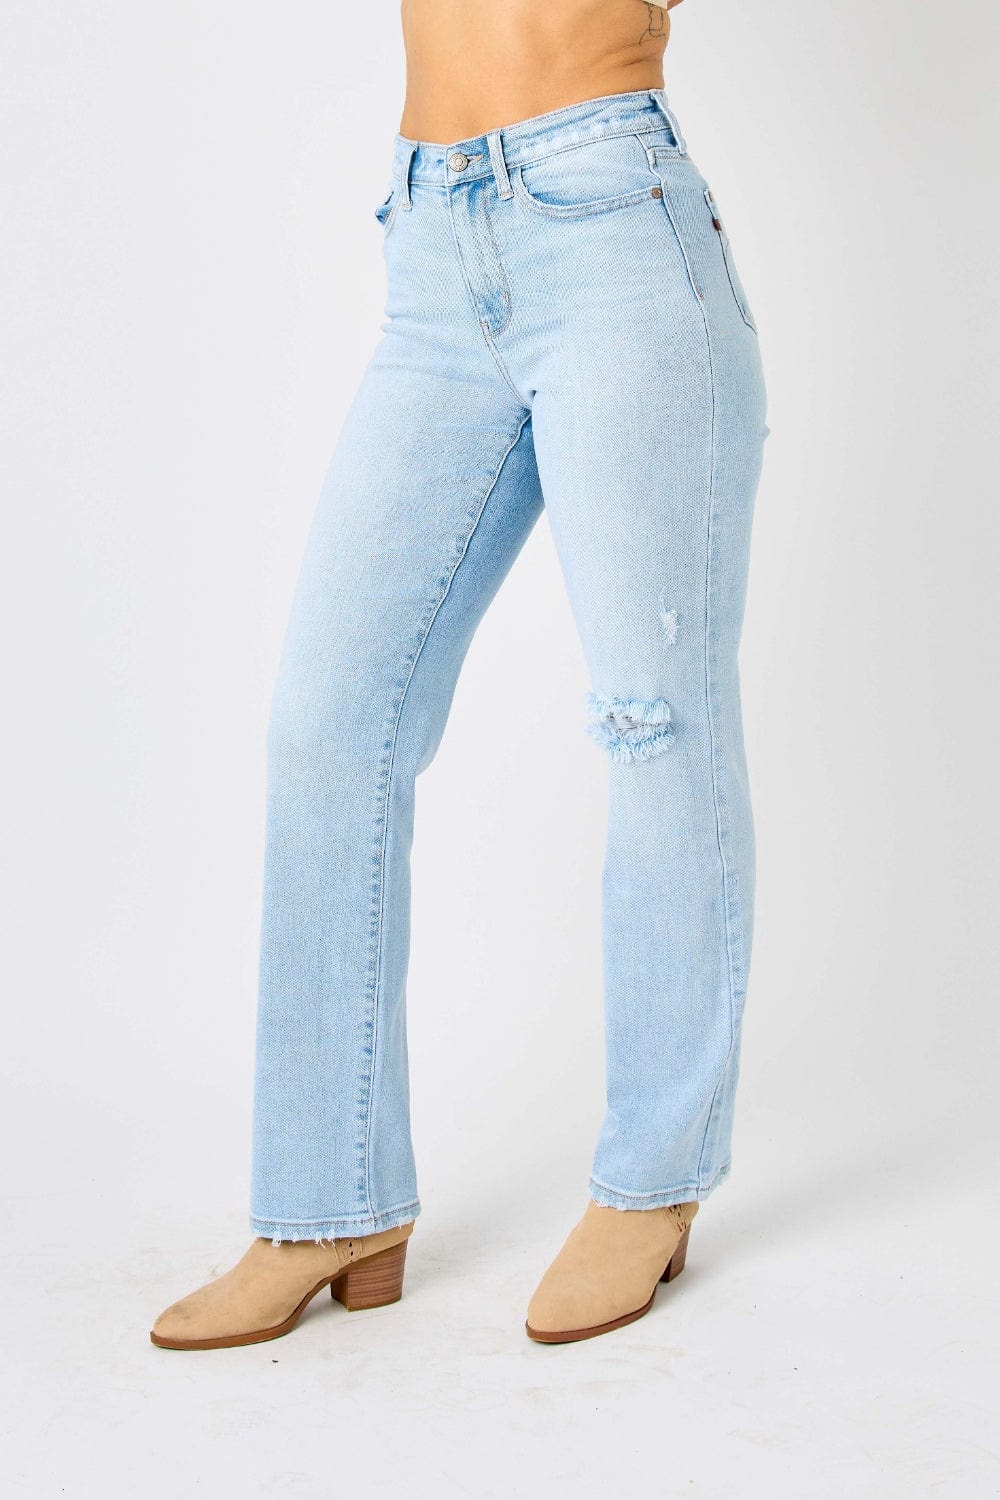 The802Gypsy Bottoms/Jeans ❤️GYPSY-Judy Blue- High Waist Distressed Straight Jeans